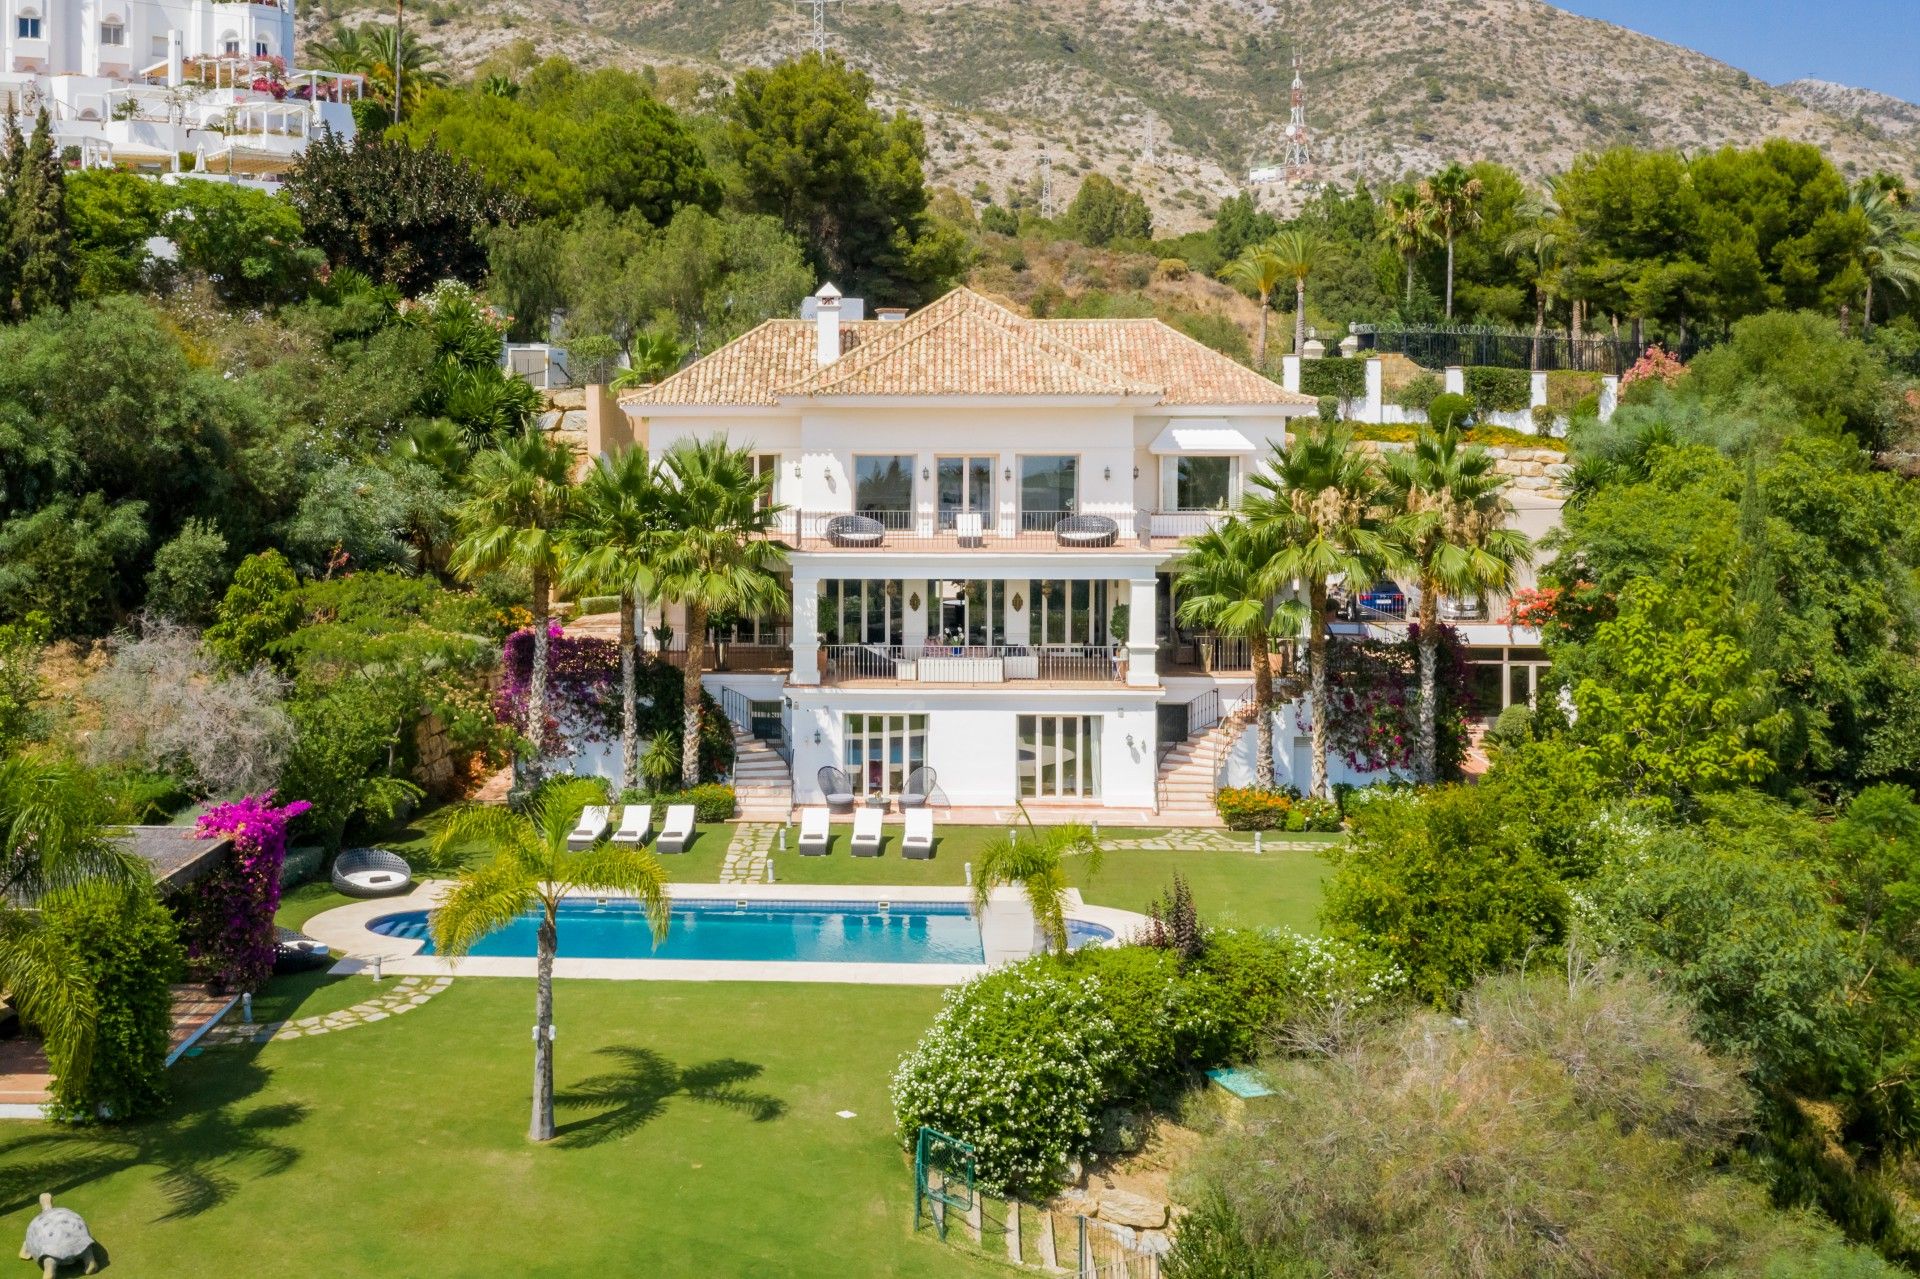 Impressive Villa with spectacular Sea Views in the renowned Marbella Hill Club PRICE: from 15.000€ per week | Engel & Völkers Marbella